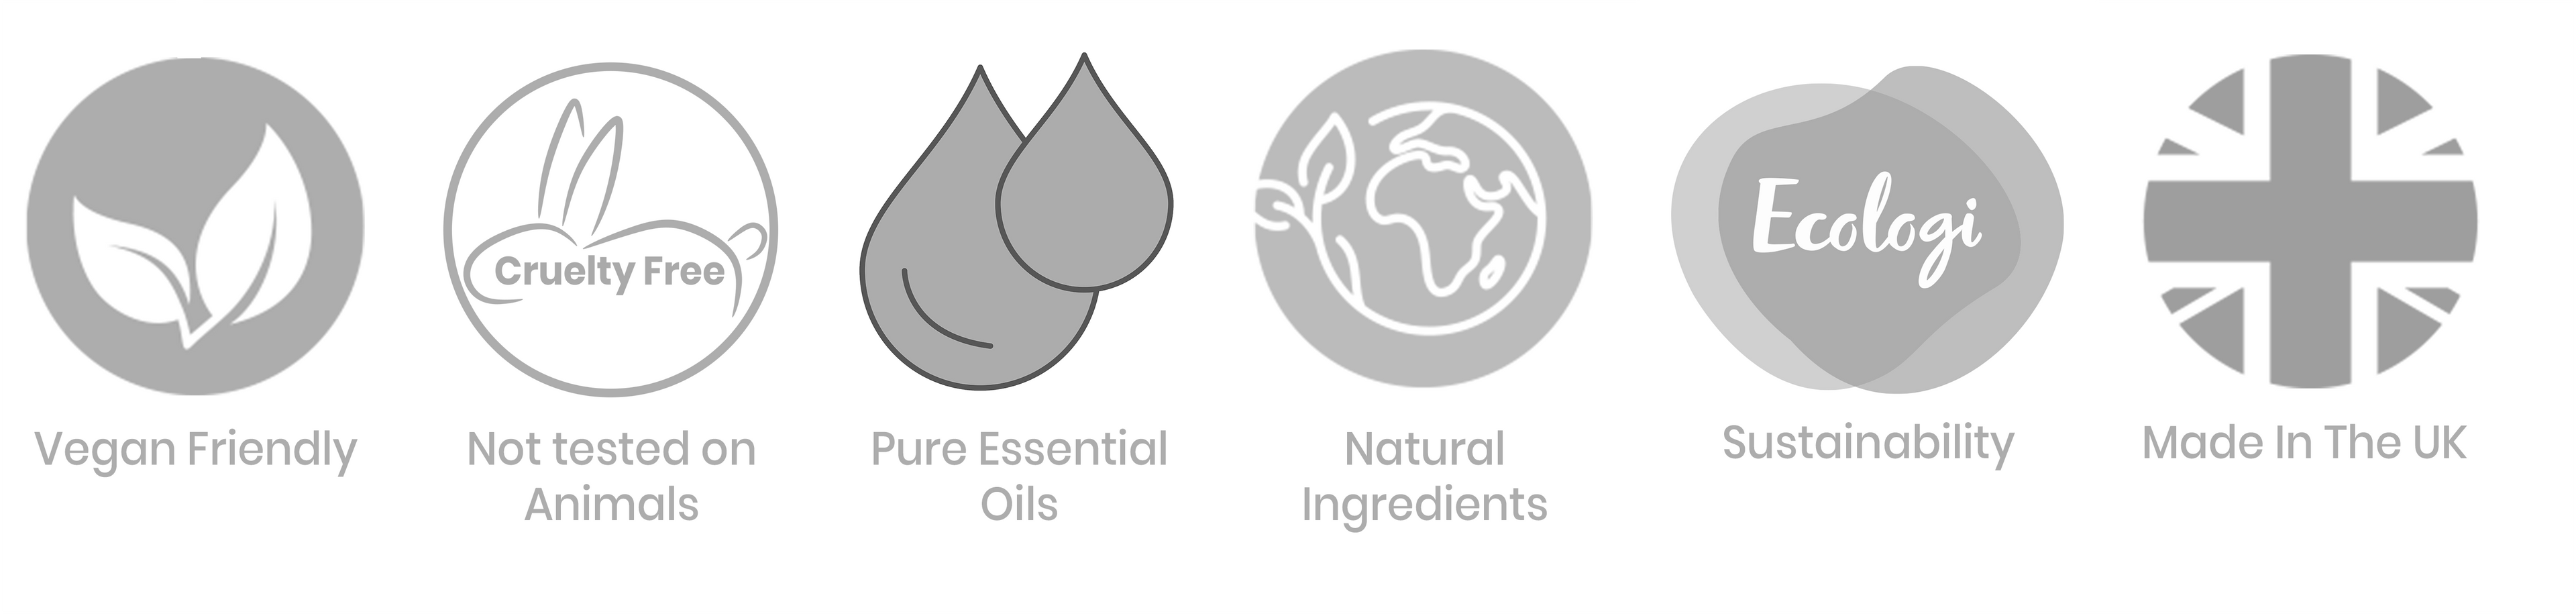 vegan friendly, cruelty free, natural ingredients, sustainable, made in the uk logos